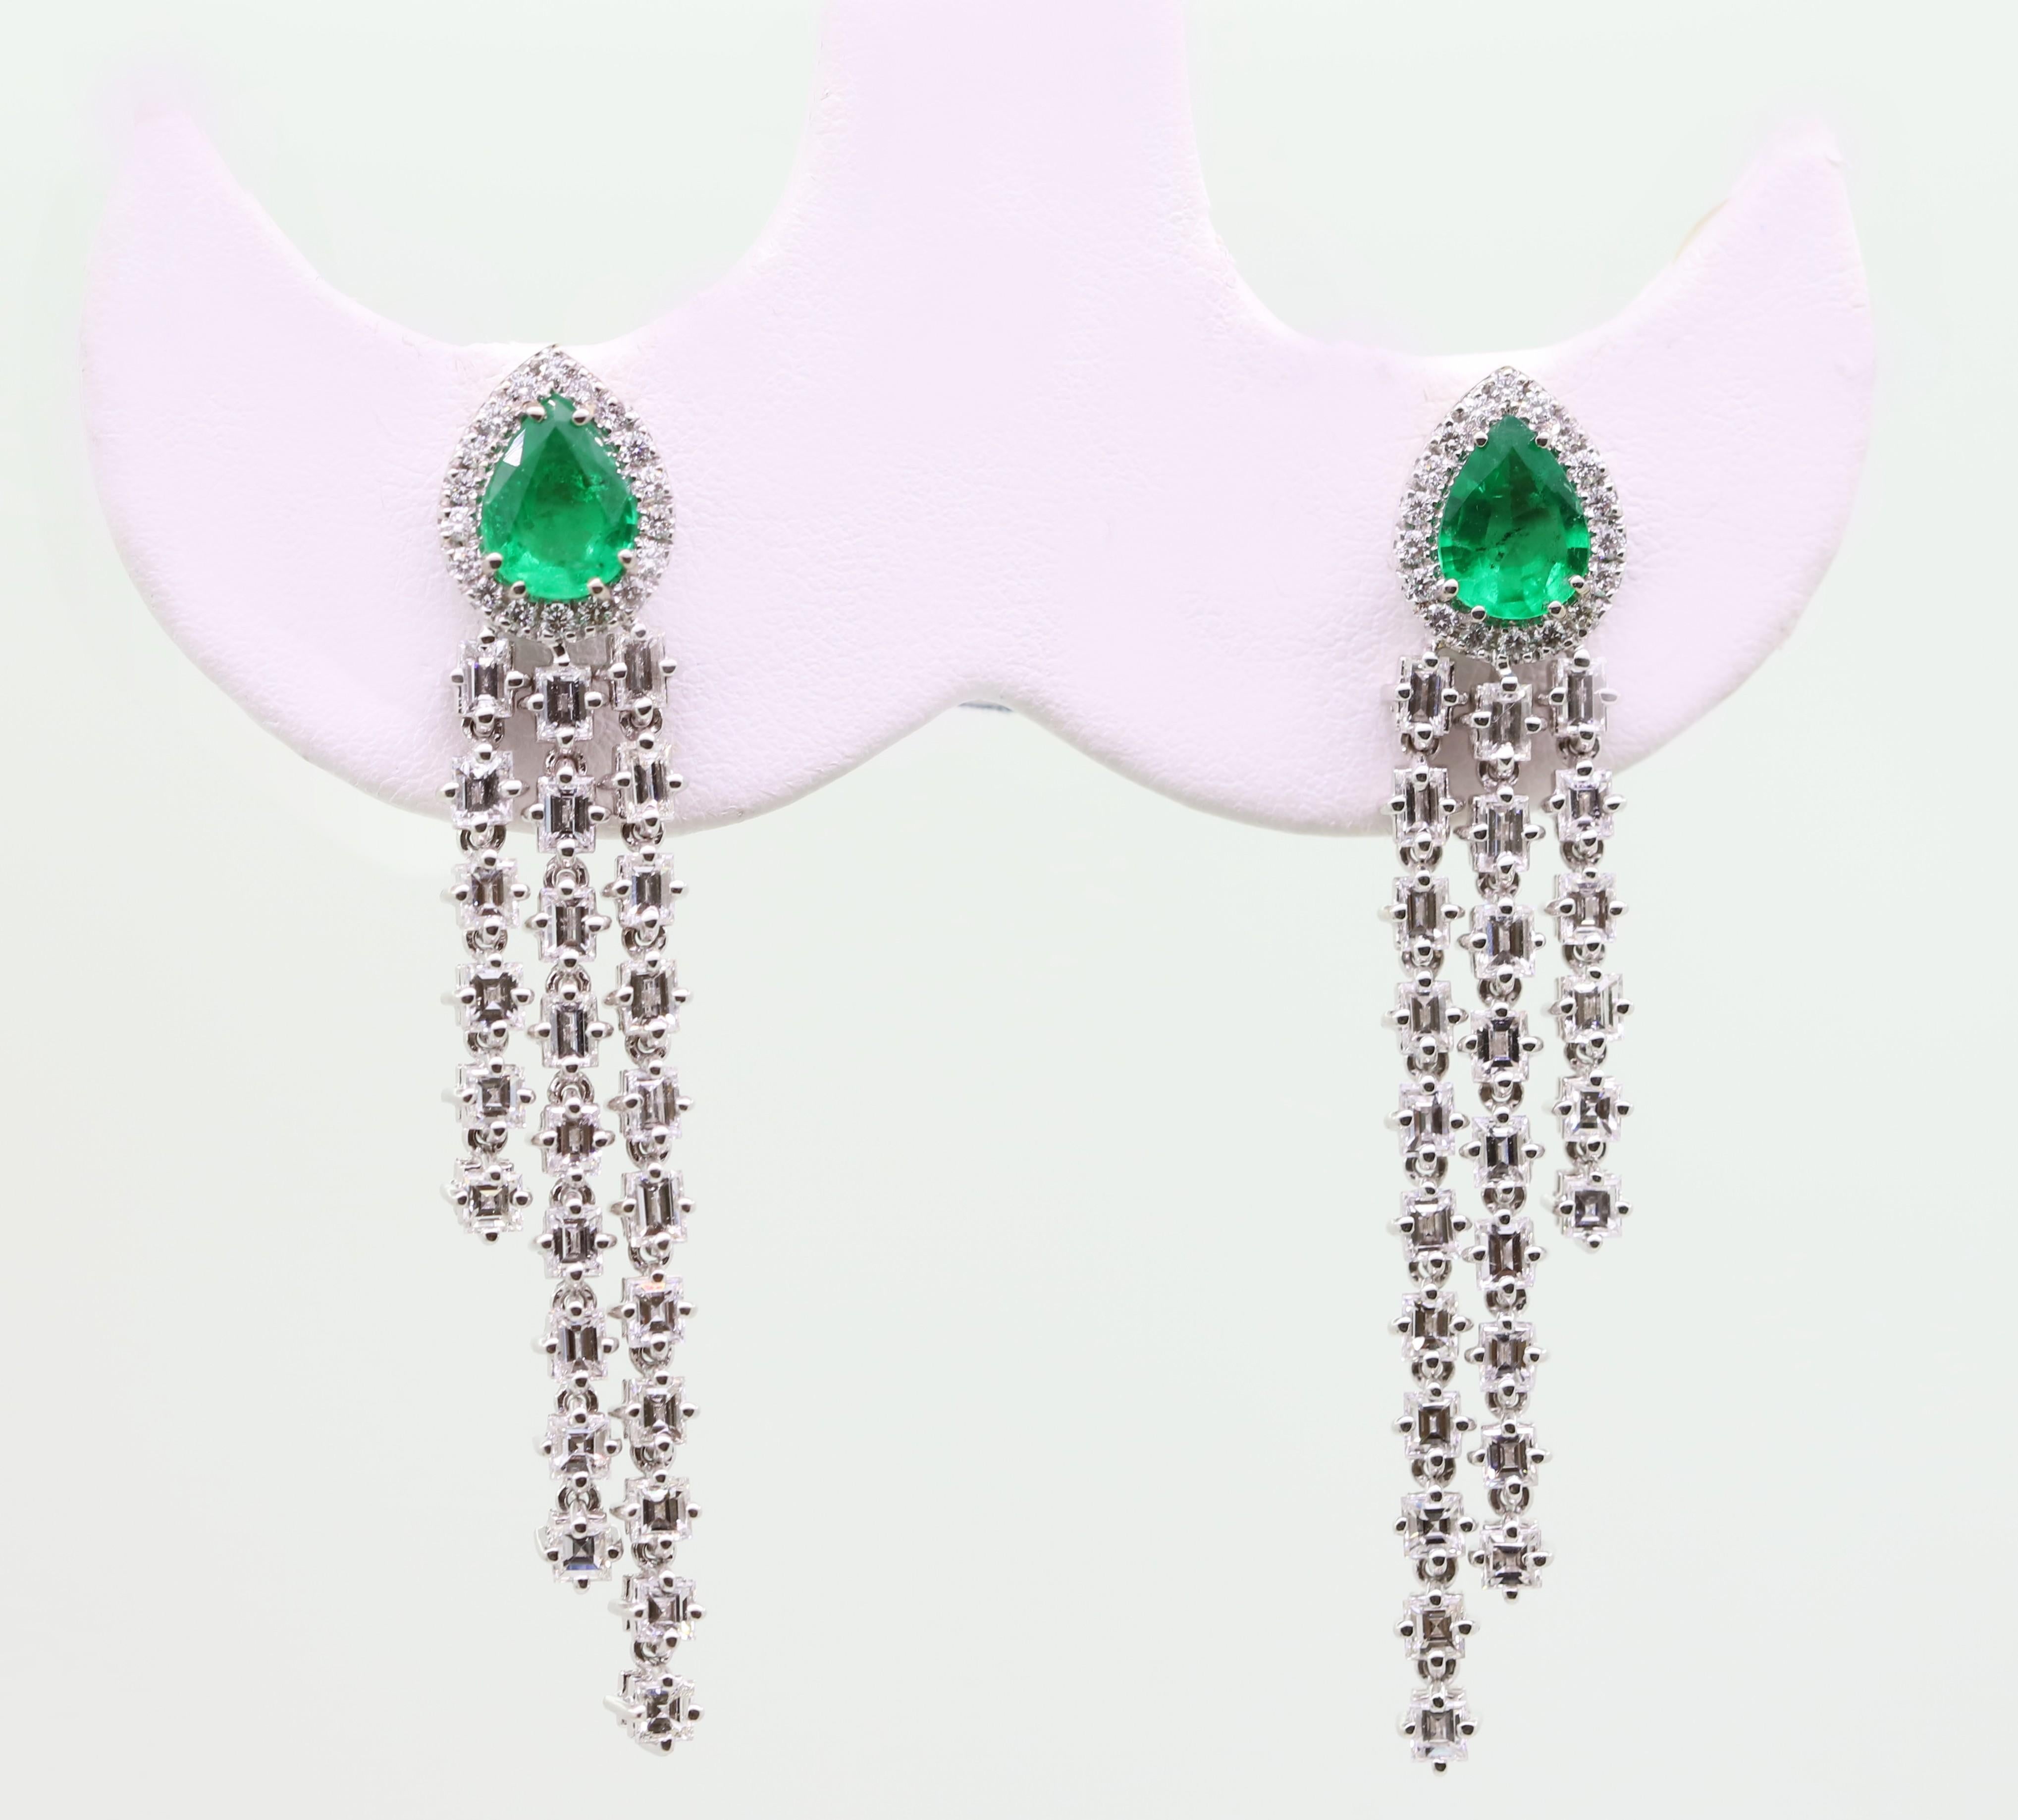 Elegant and refined Dangle Earrings featuring 2 Pear Shape Vivid Green Emerald for 1.72 Carat Total, 
framed by Round White Diamonds.
Three dangling lines of White Baguette-cut Diamonds for 4.83 Carat Total give these Earrings a Feminine touch.
The